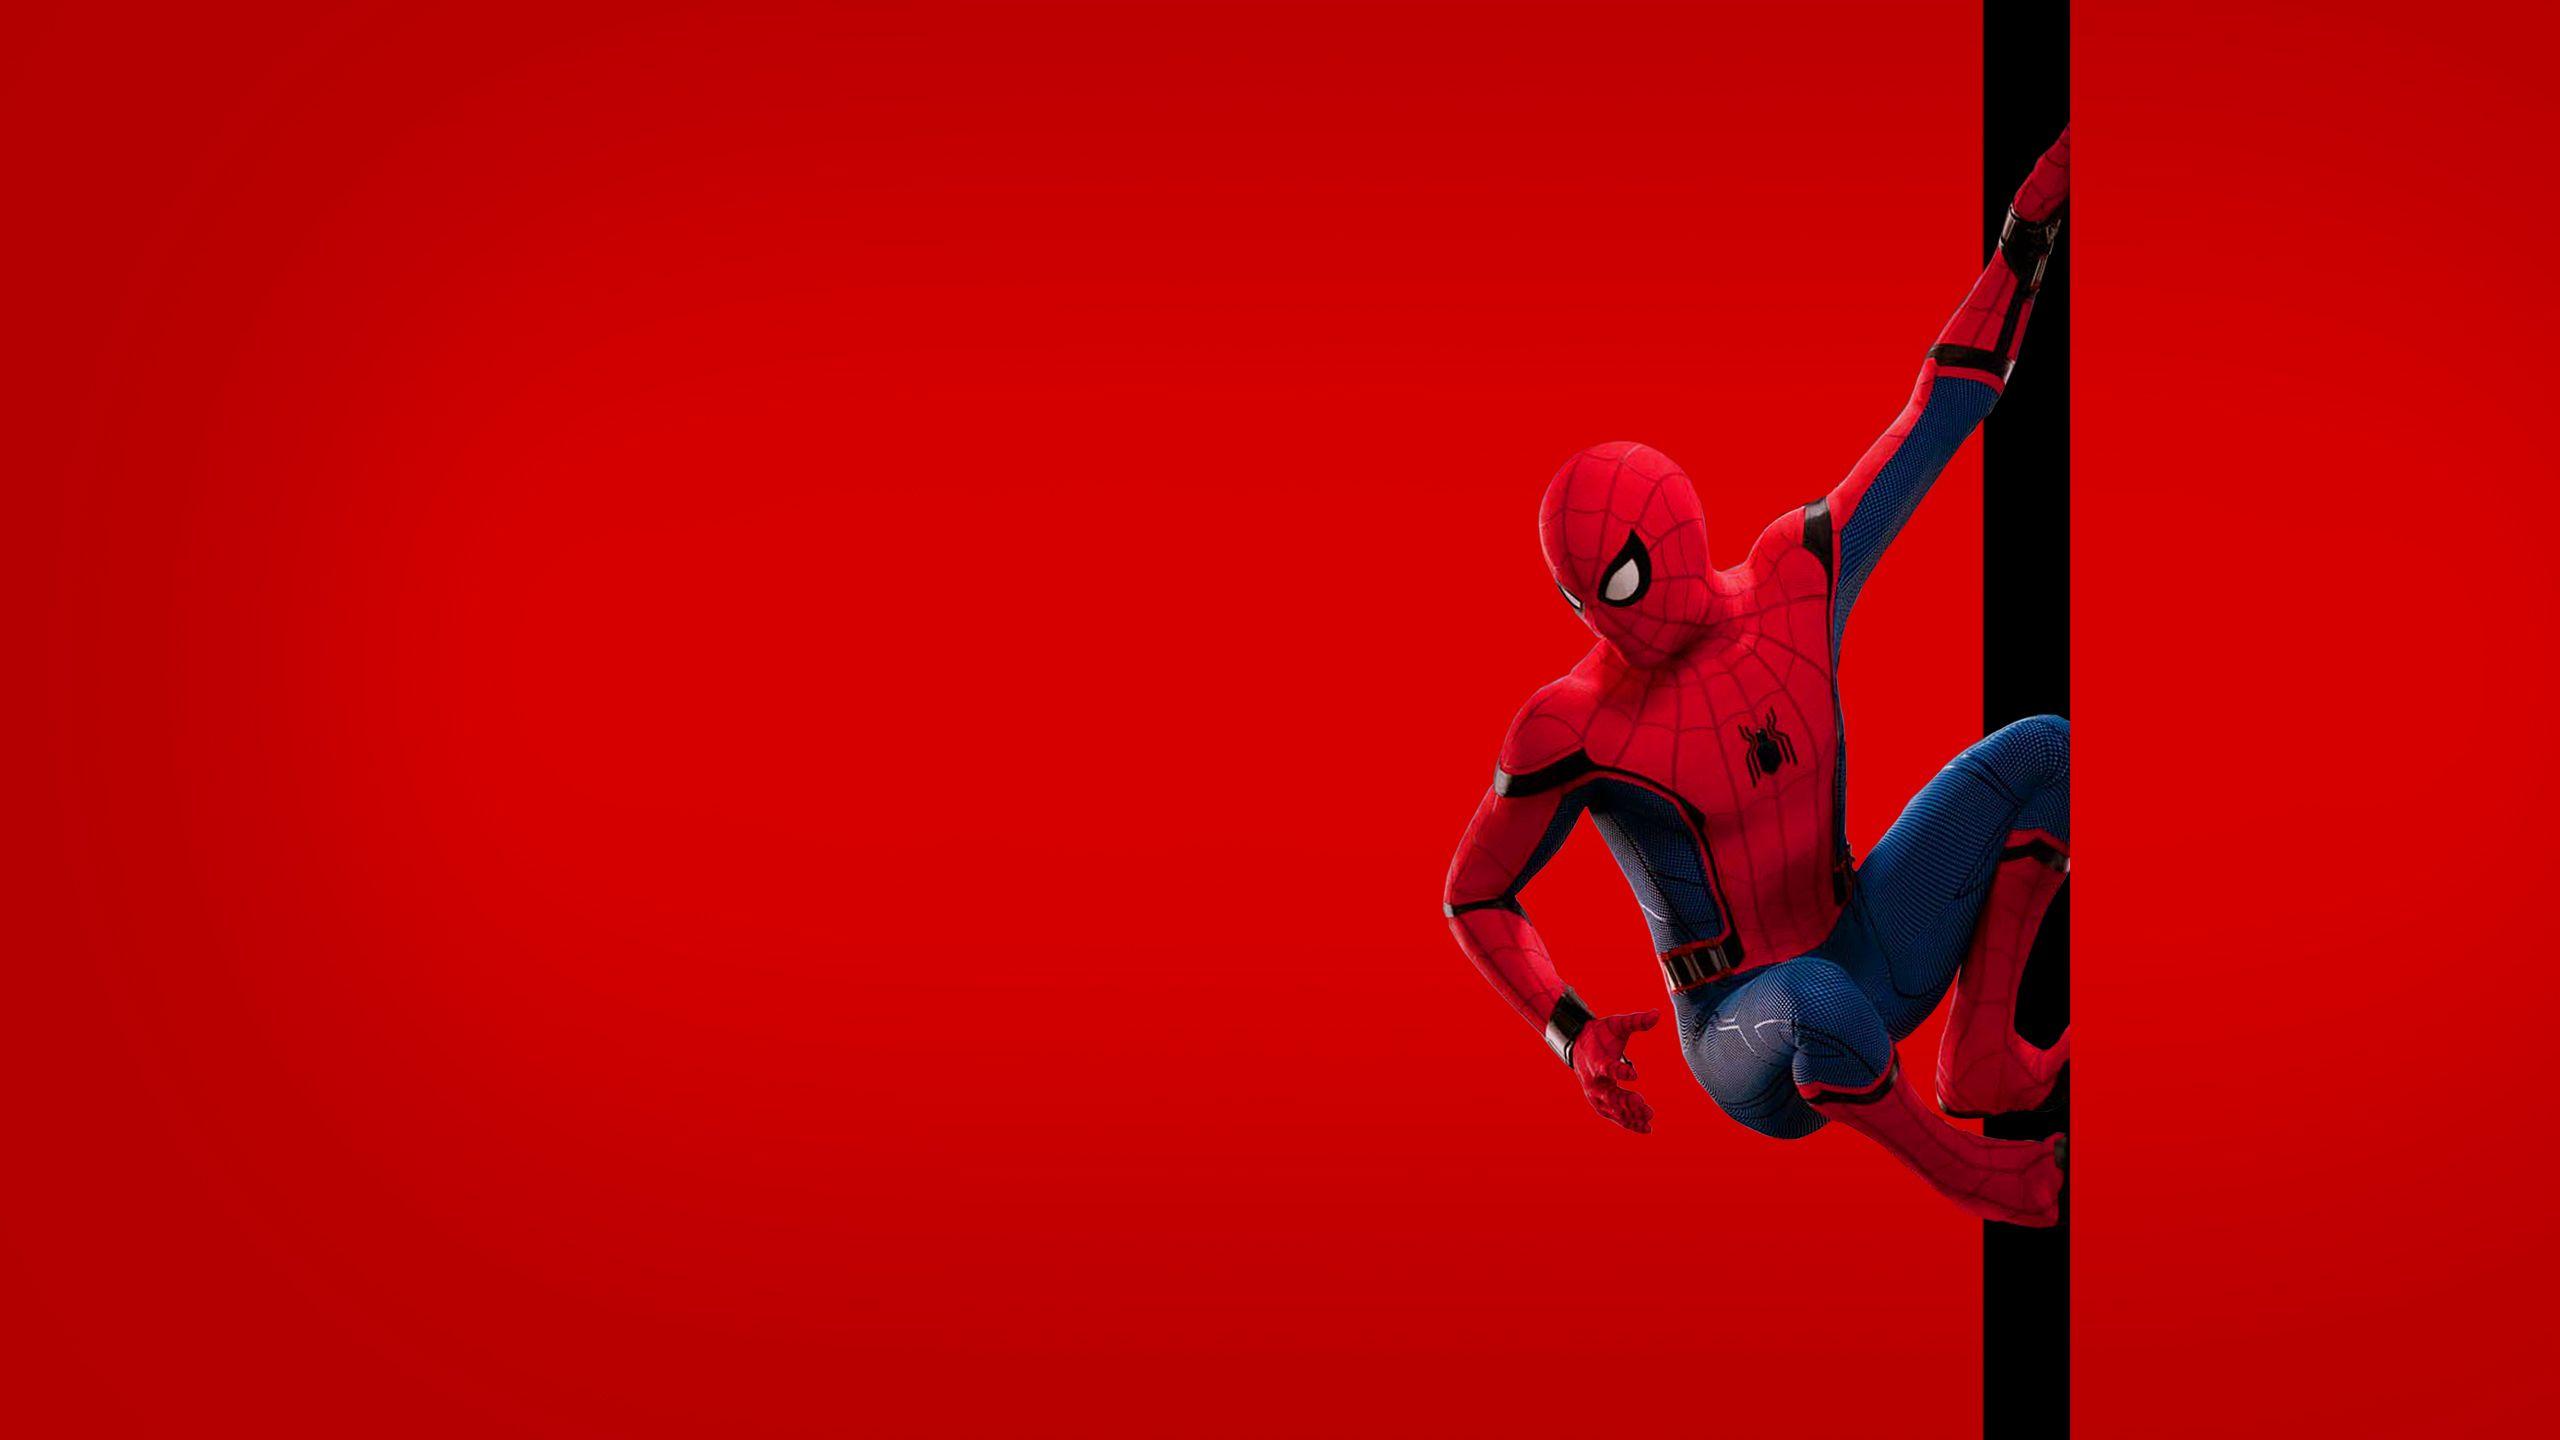 I Made Some Simple Spider Man Wallpaper